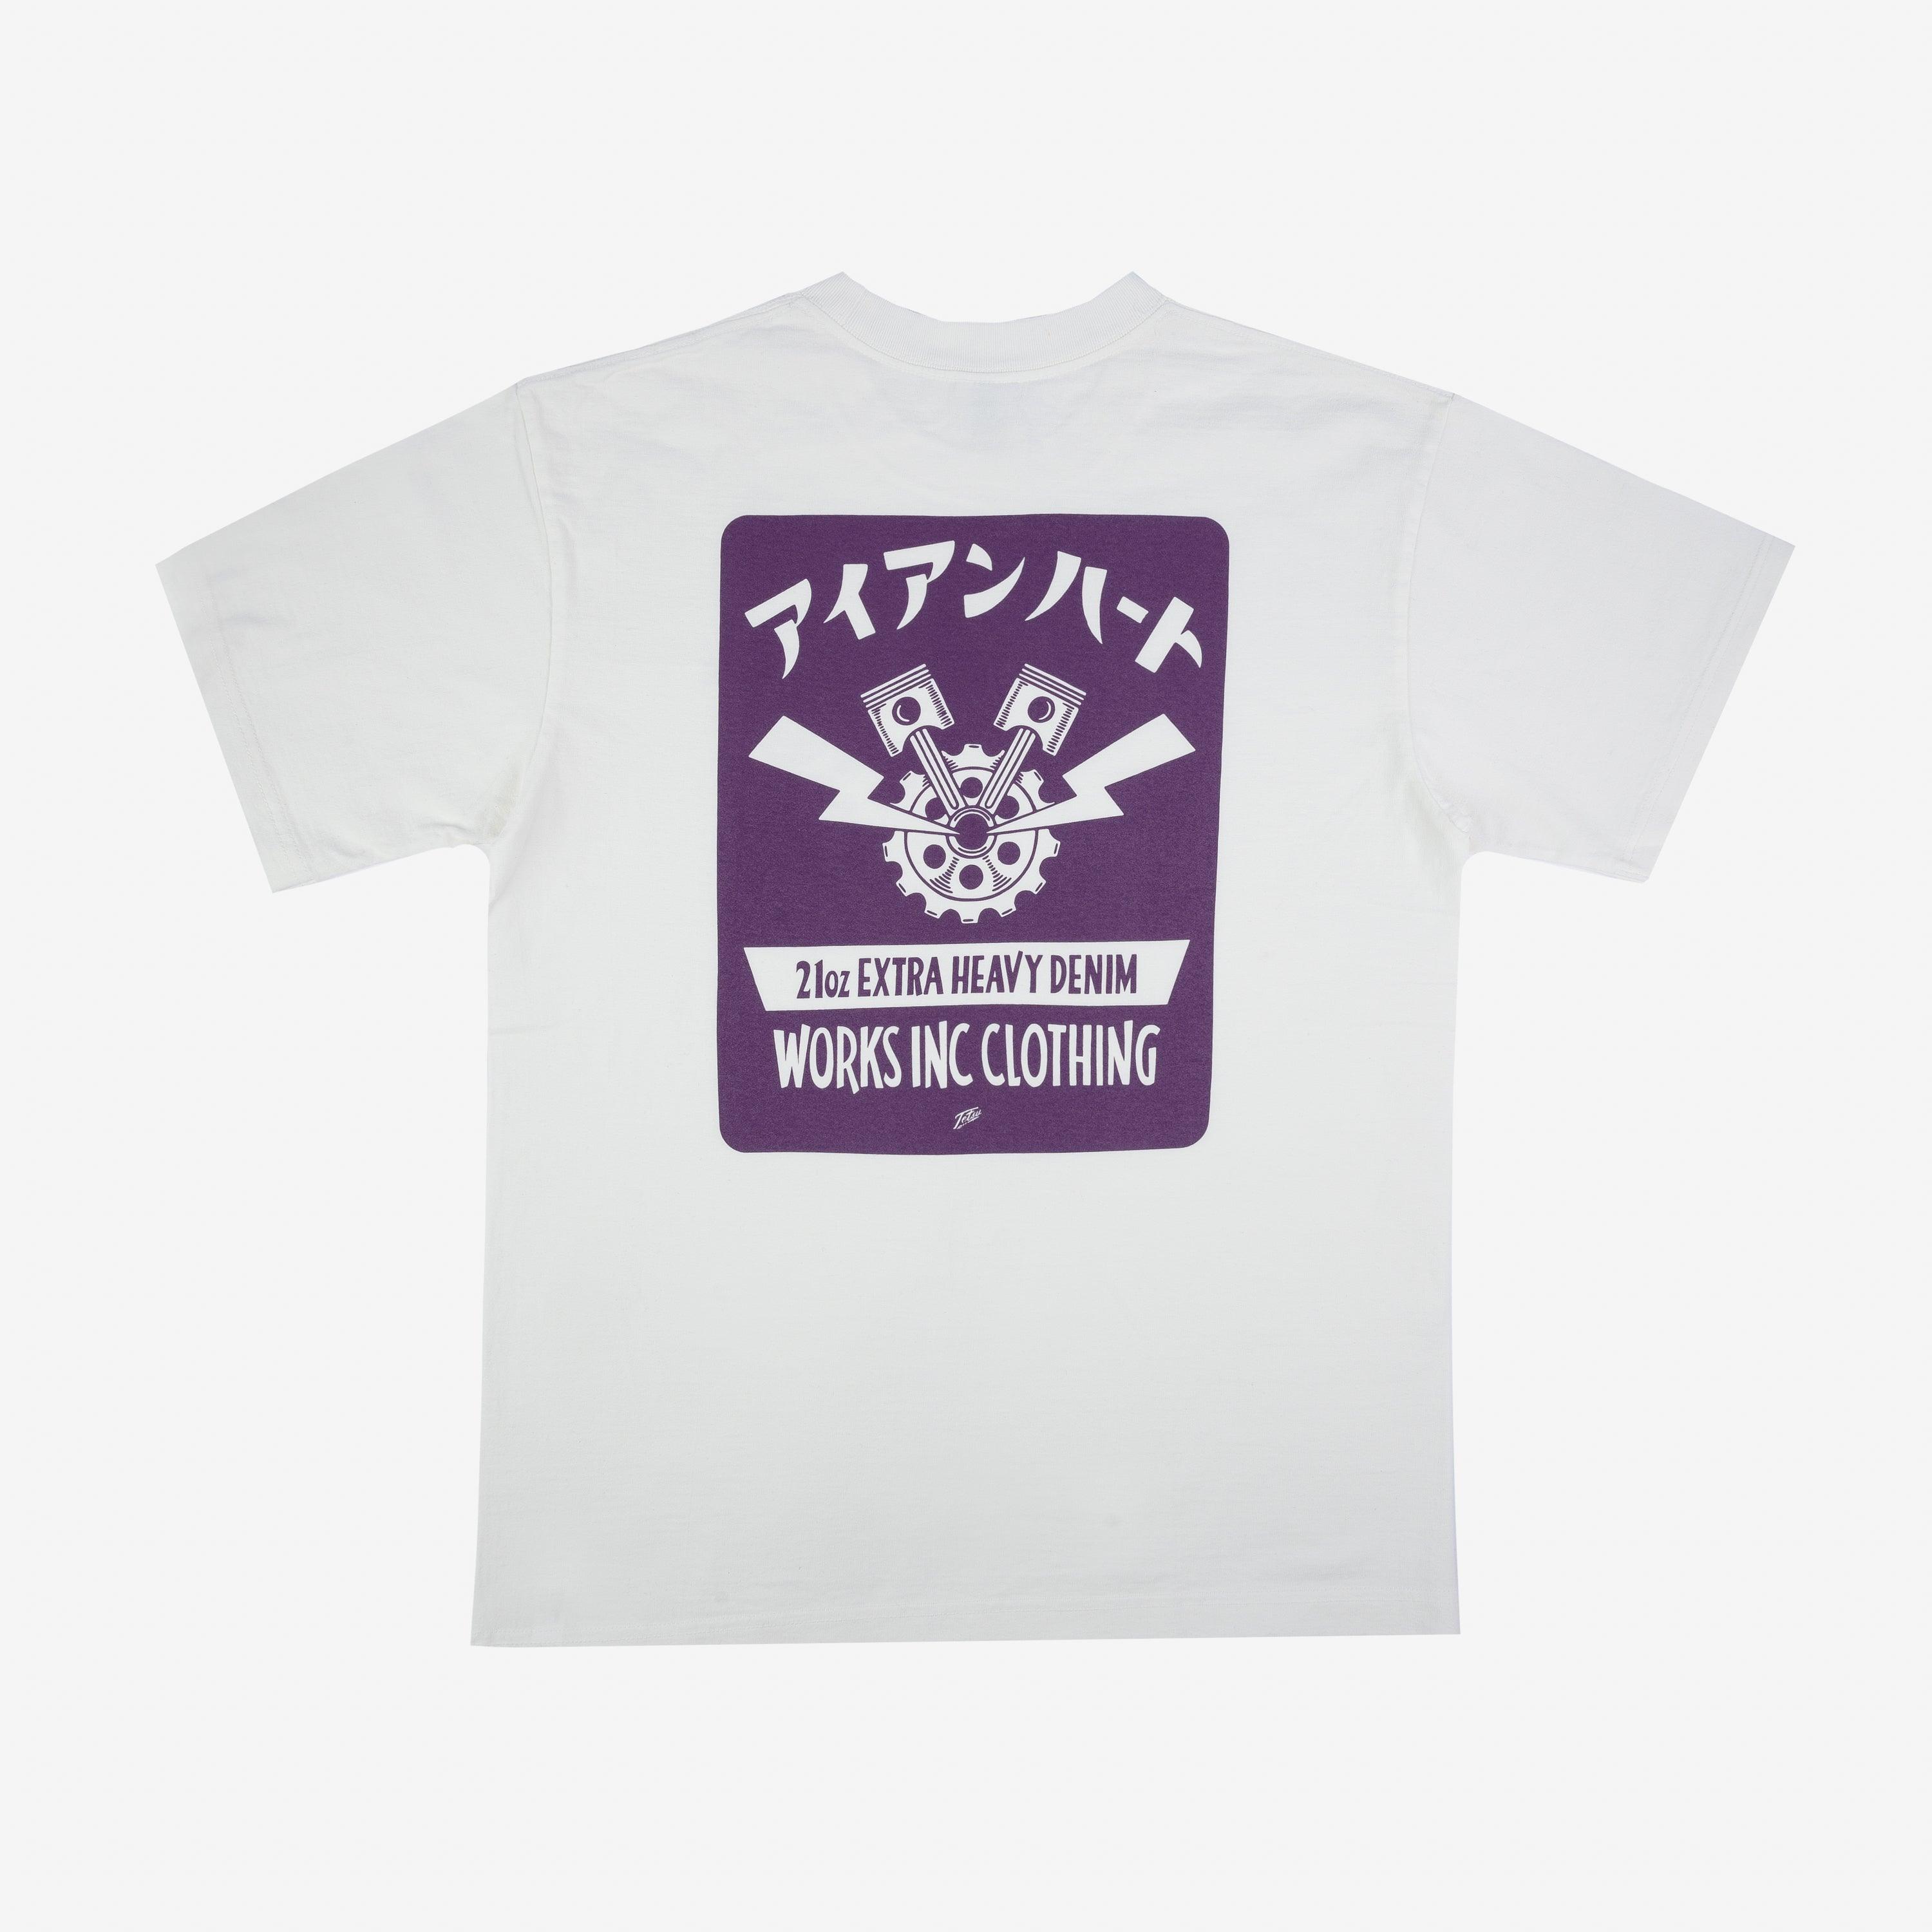 7.5oz Printed Loopwheel Crew Neck T-Shirt - White - Guilty Party